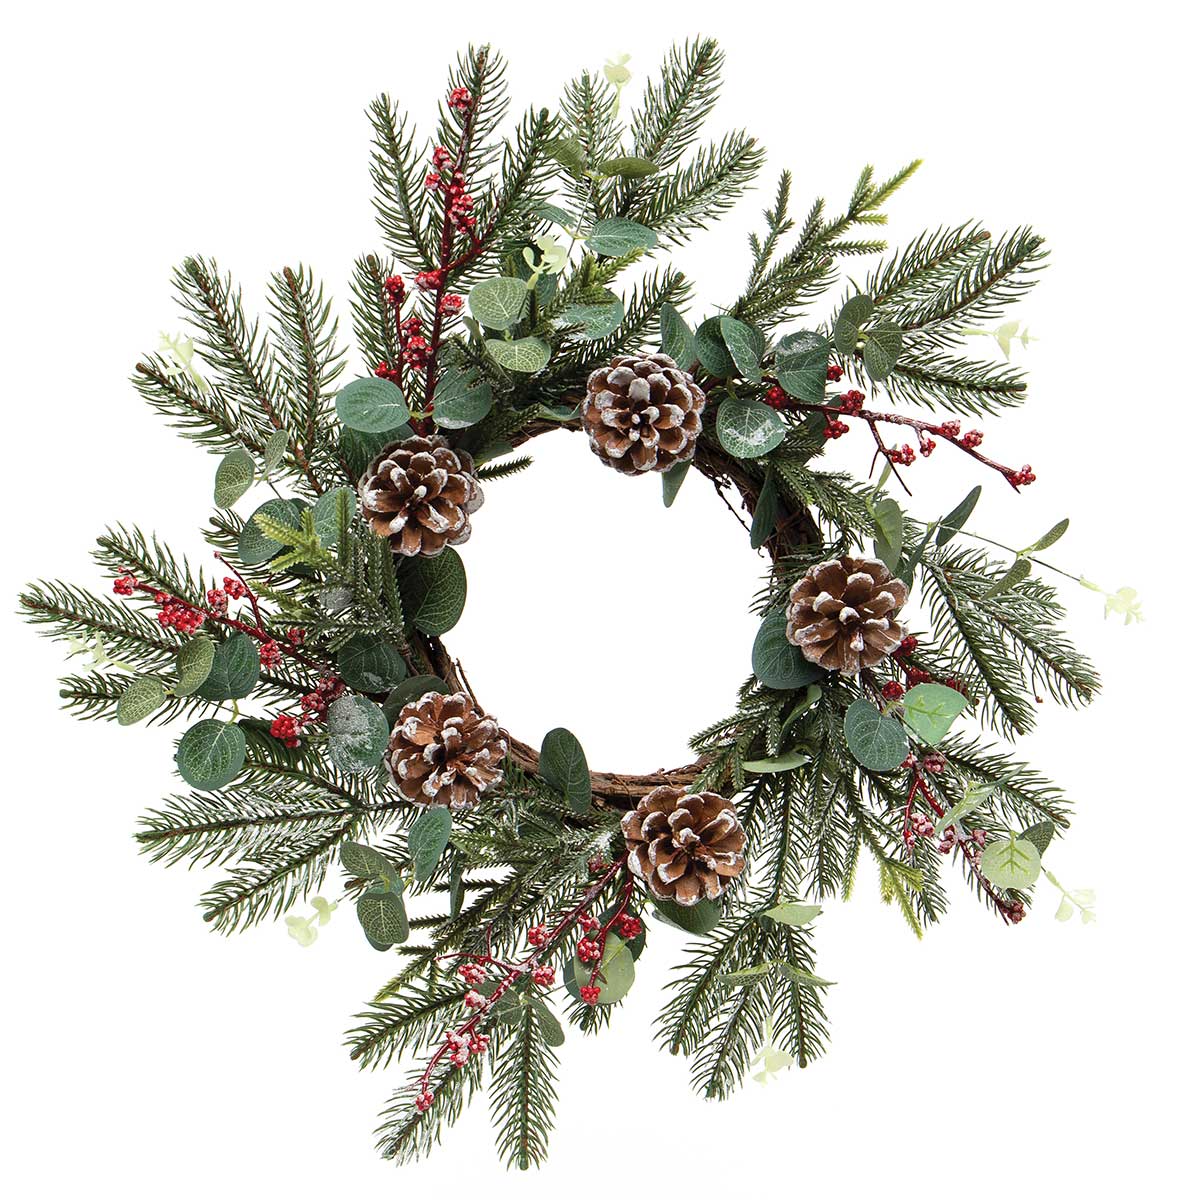 v22 WREATH HOLIDAY BERRY PINE 22IN PLASTIC/POLYESTER/PINECONES